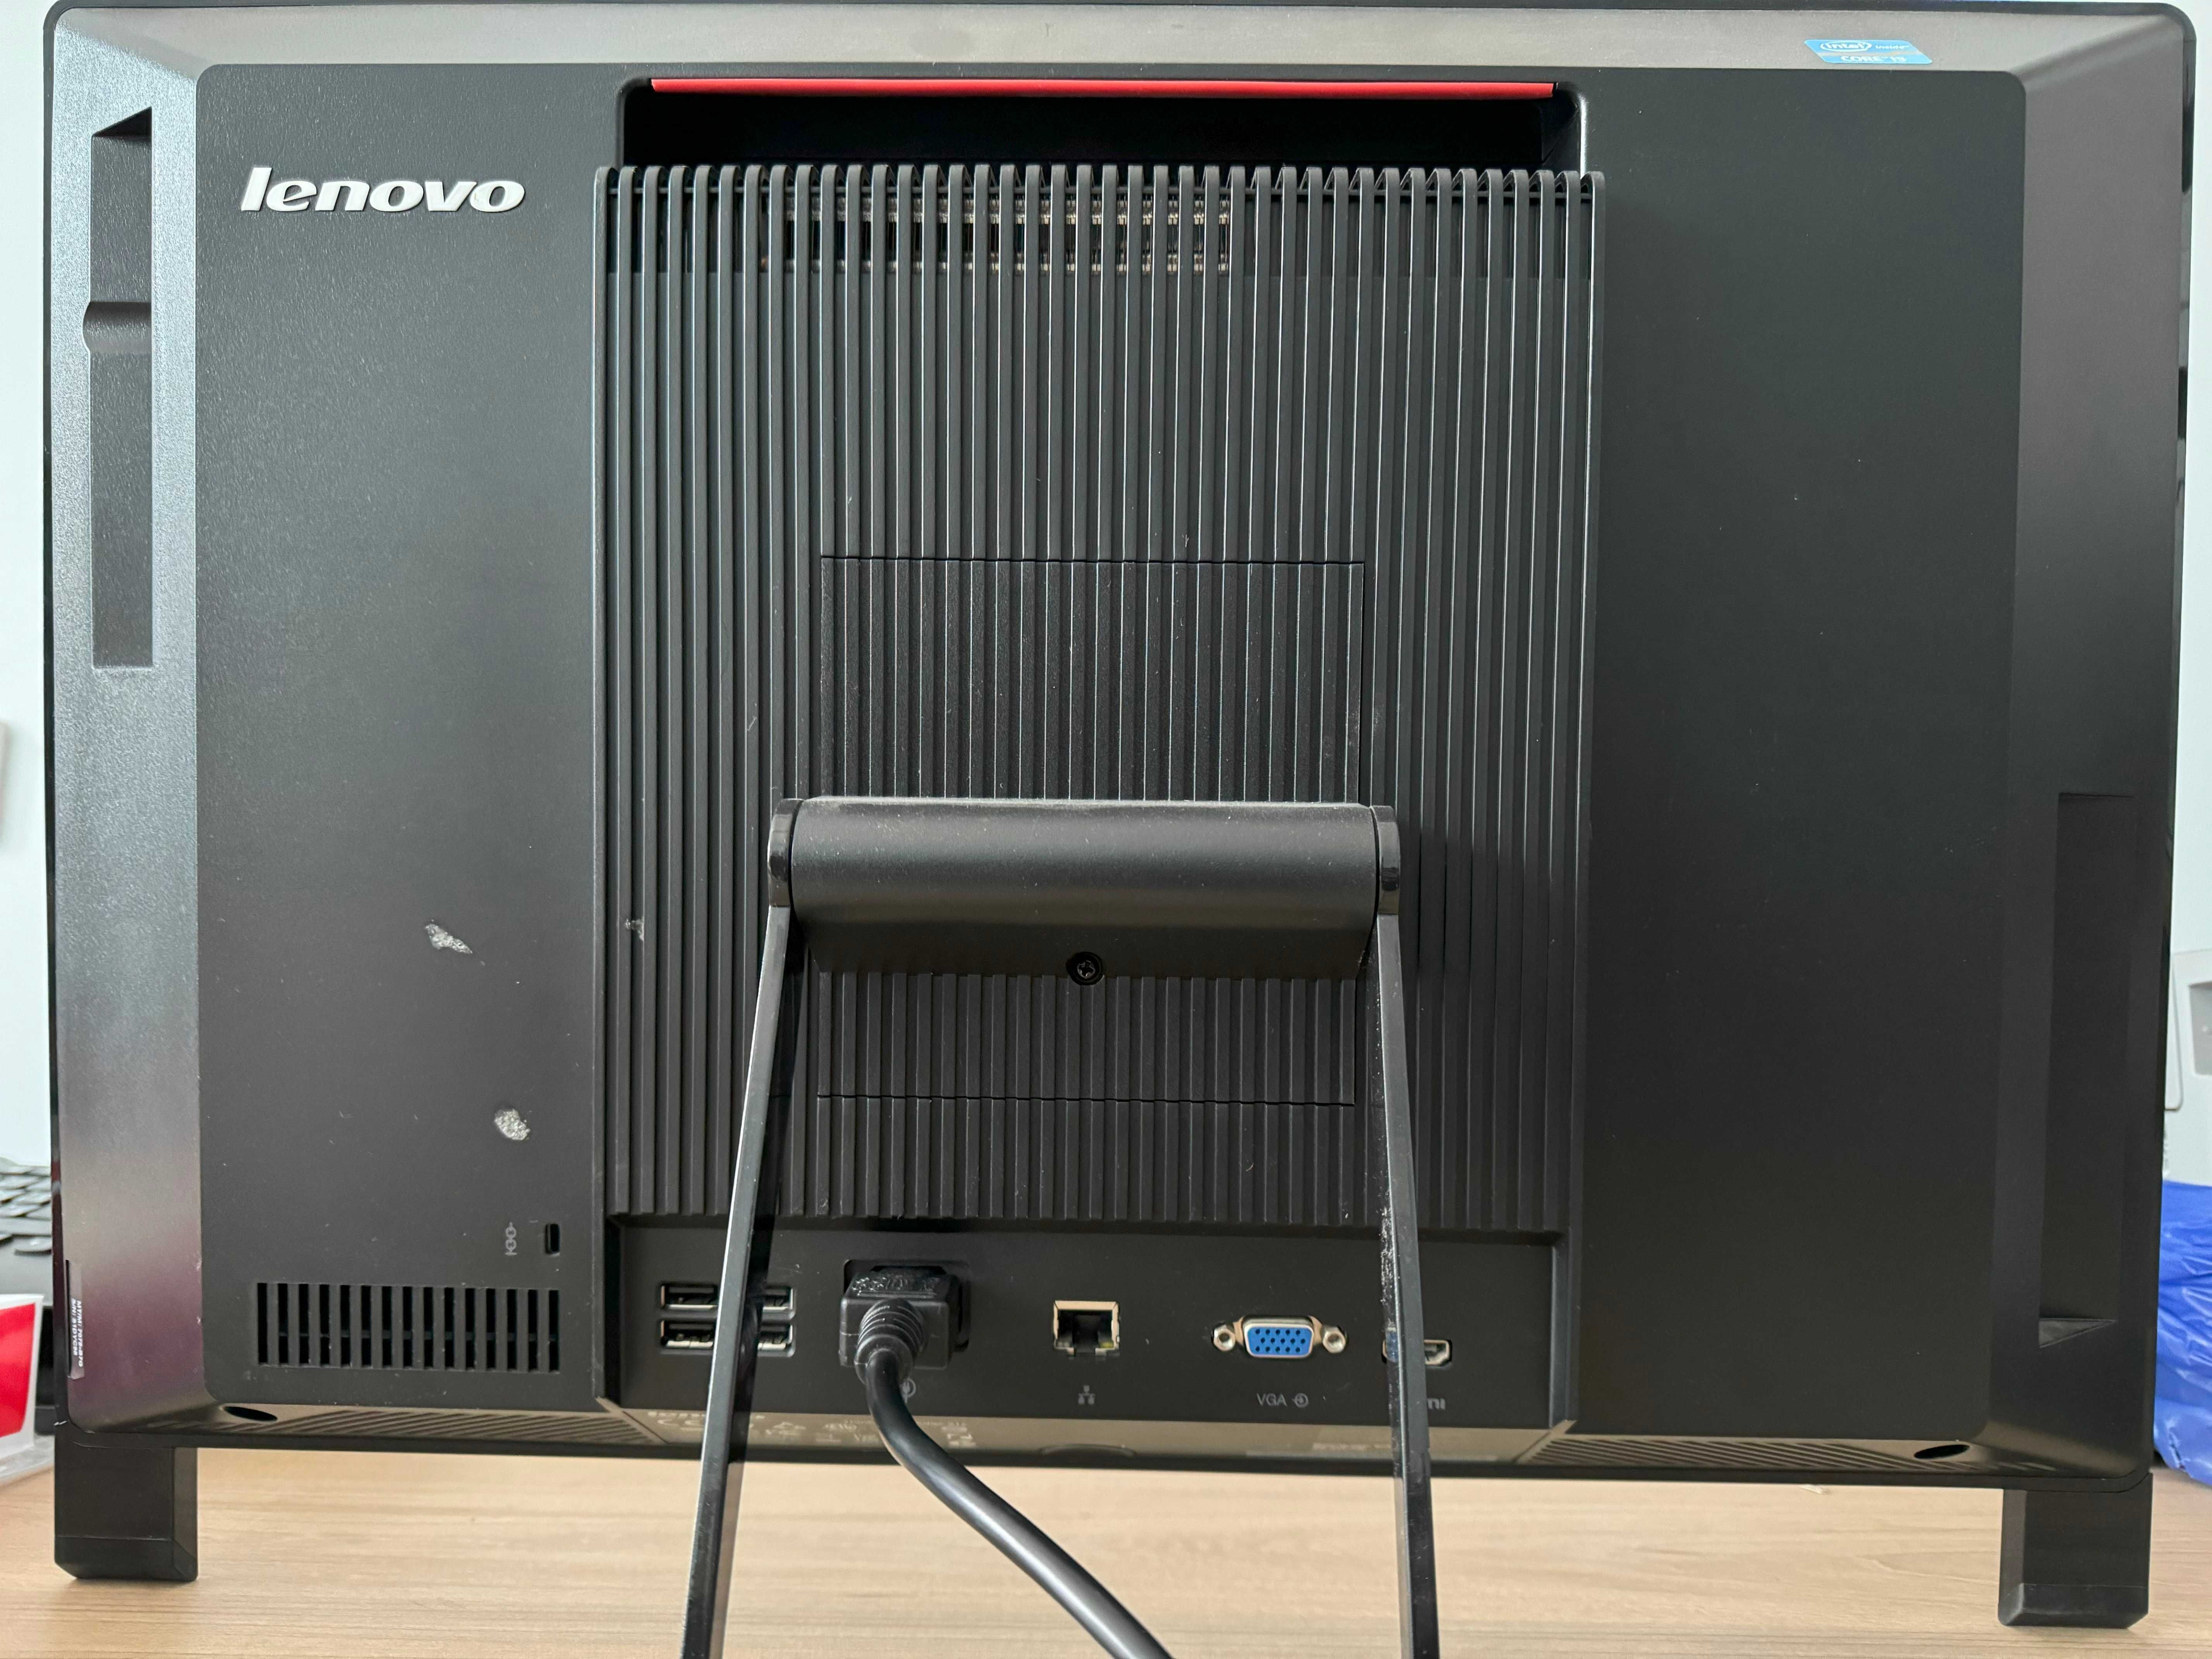 Edge 91z All-in-One (ThinkCentre) - Type 7078